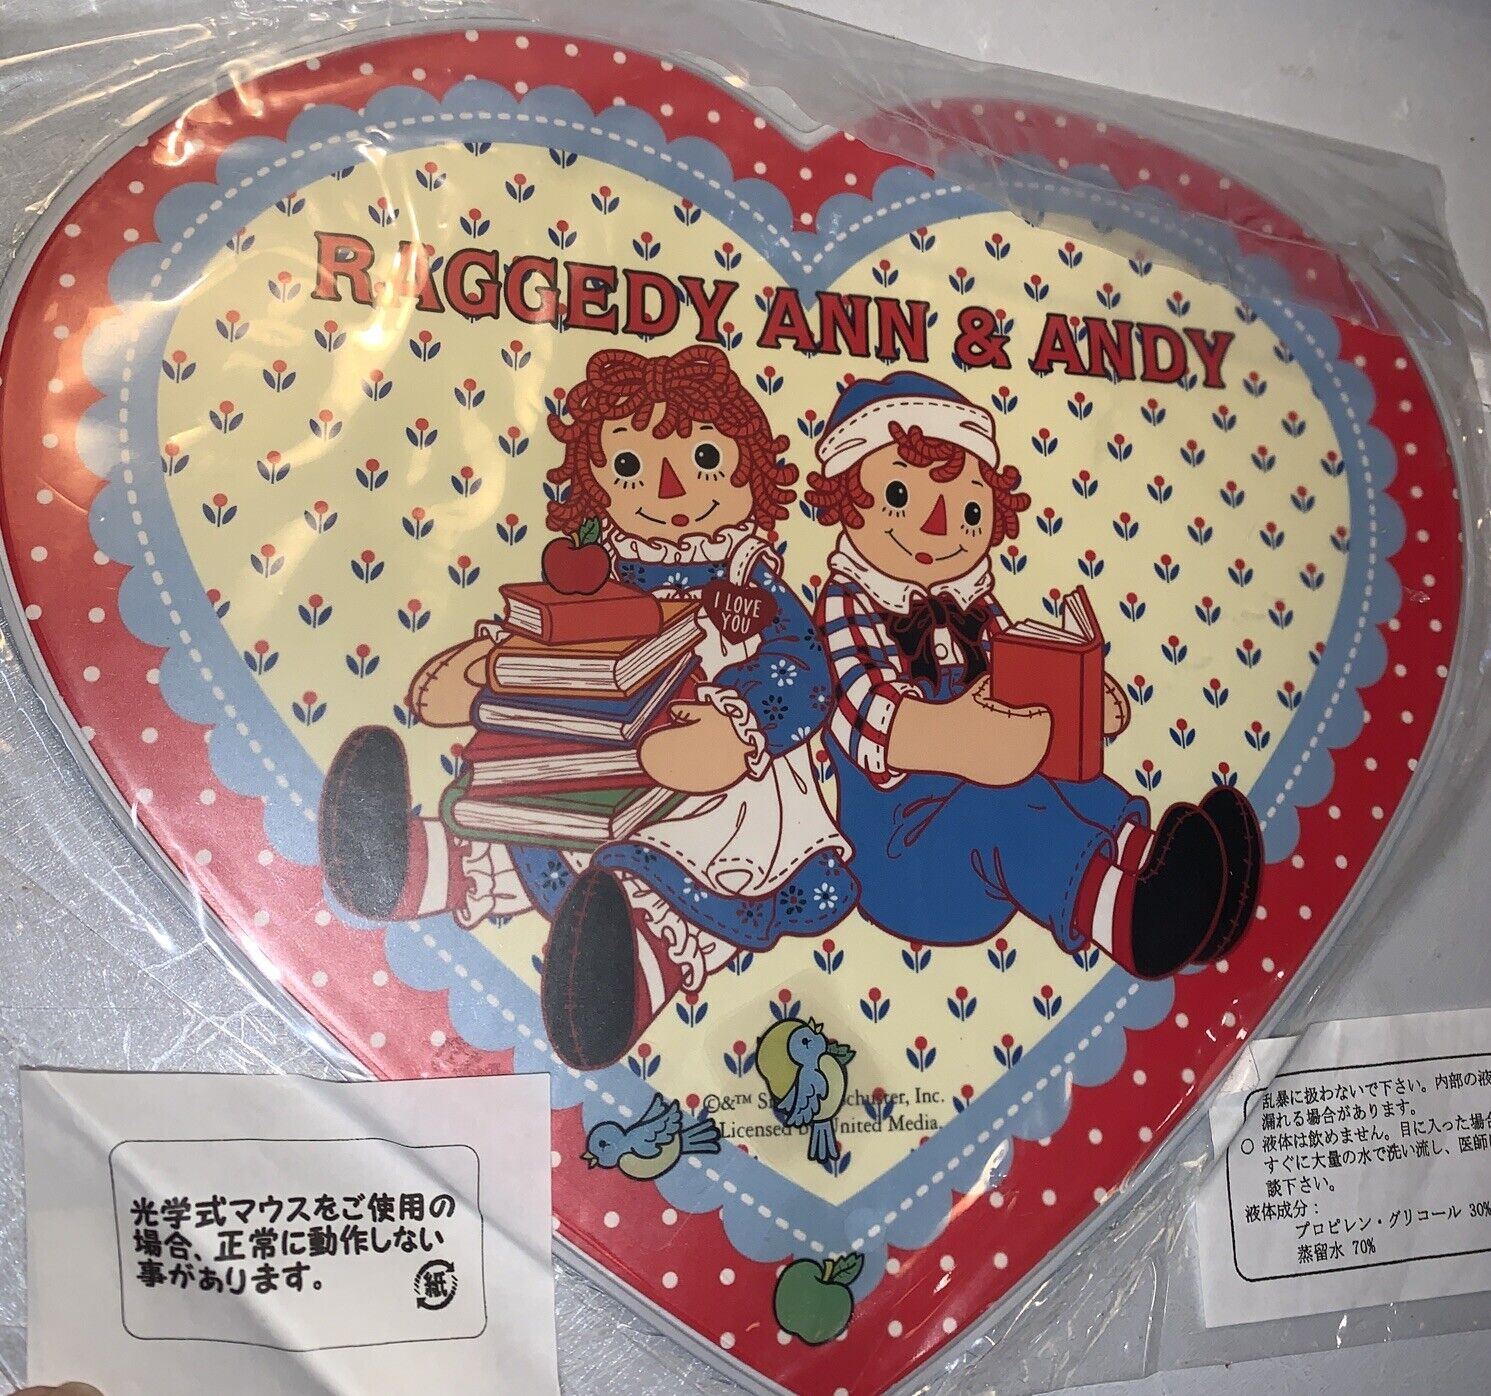 Raggedy Ann & Andy S&S Character Mouse Pad 9-1/2 X 8-1/2” Heart Shaped Sealed